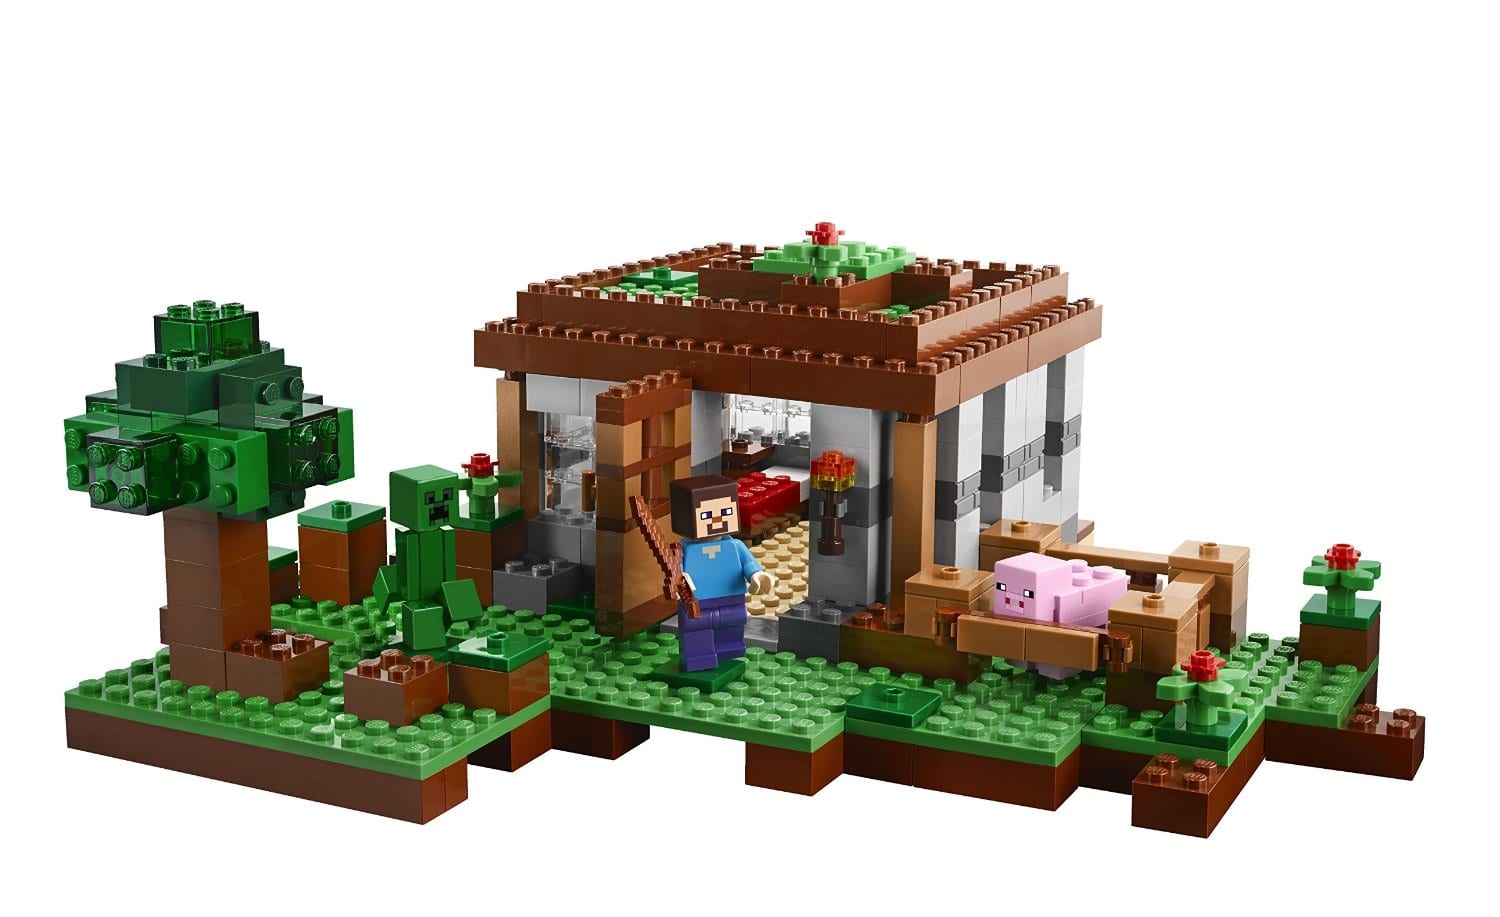 New Minecraft Lego Sets for 2014 on Sale Now | SKrafty